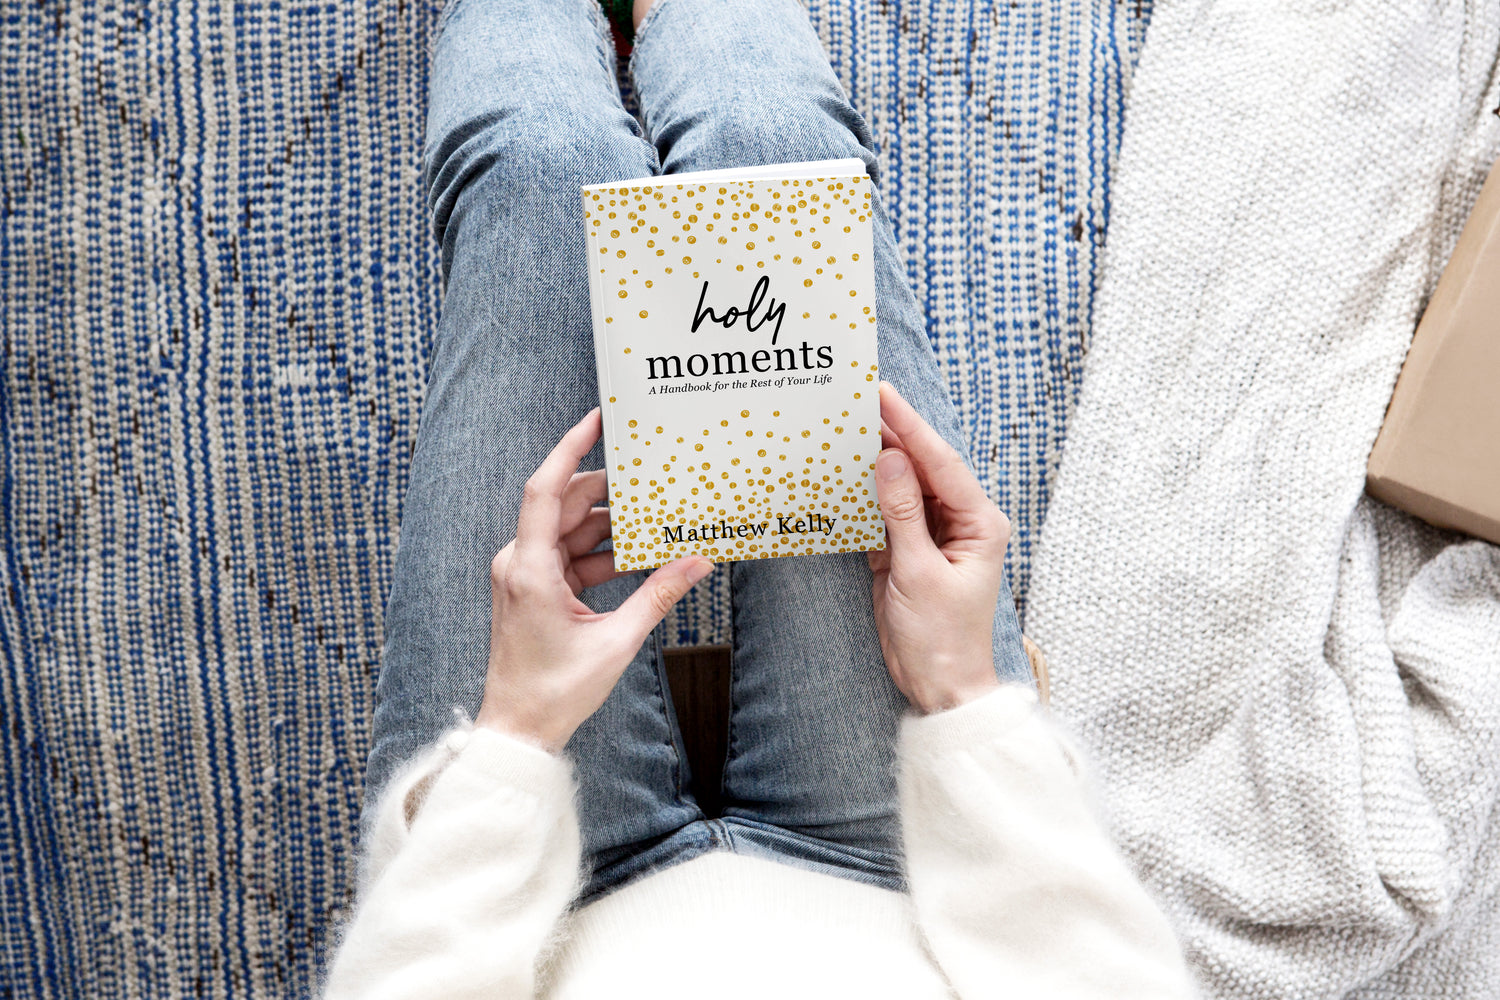 Holy Moments by Matthew Kelly